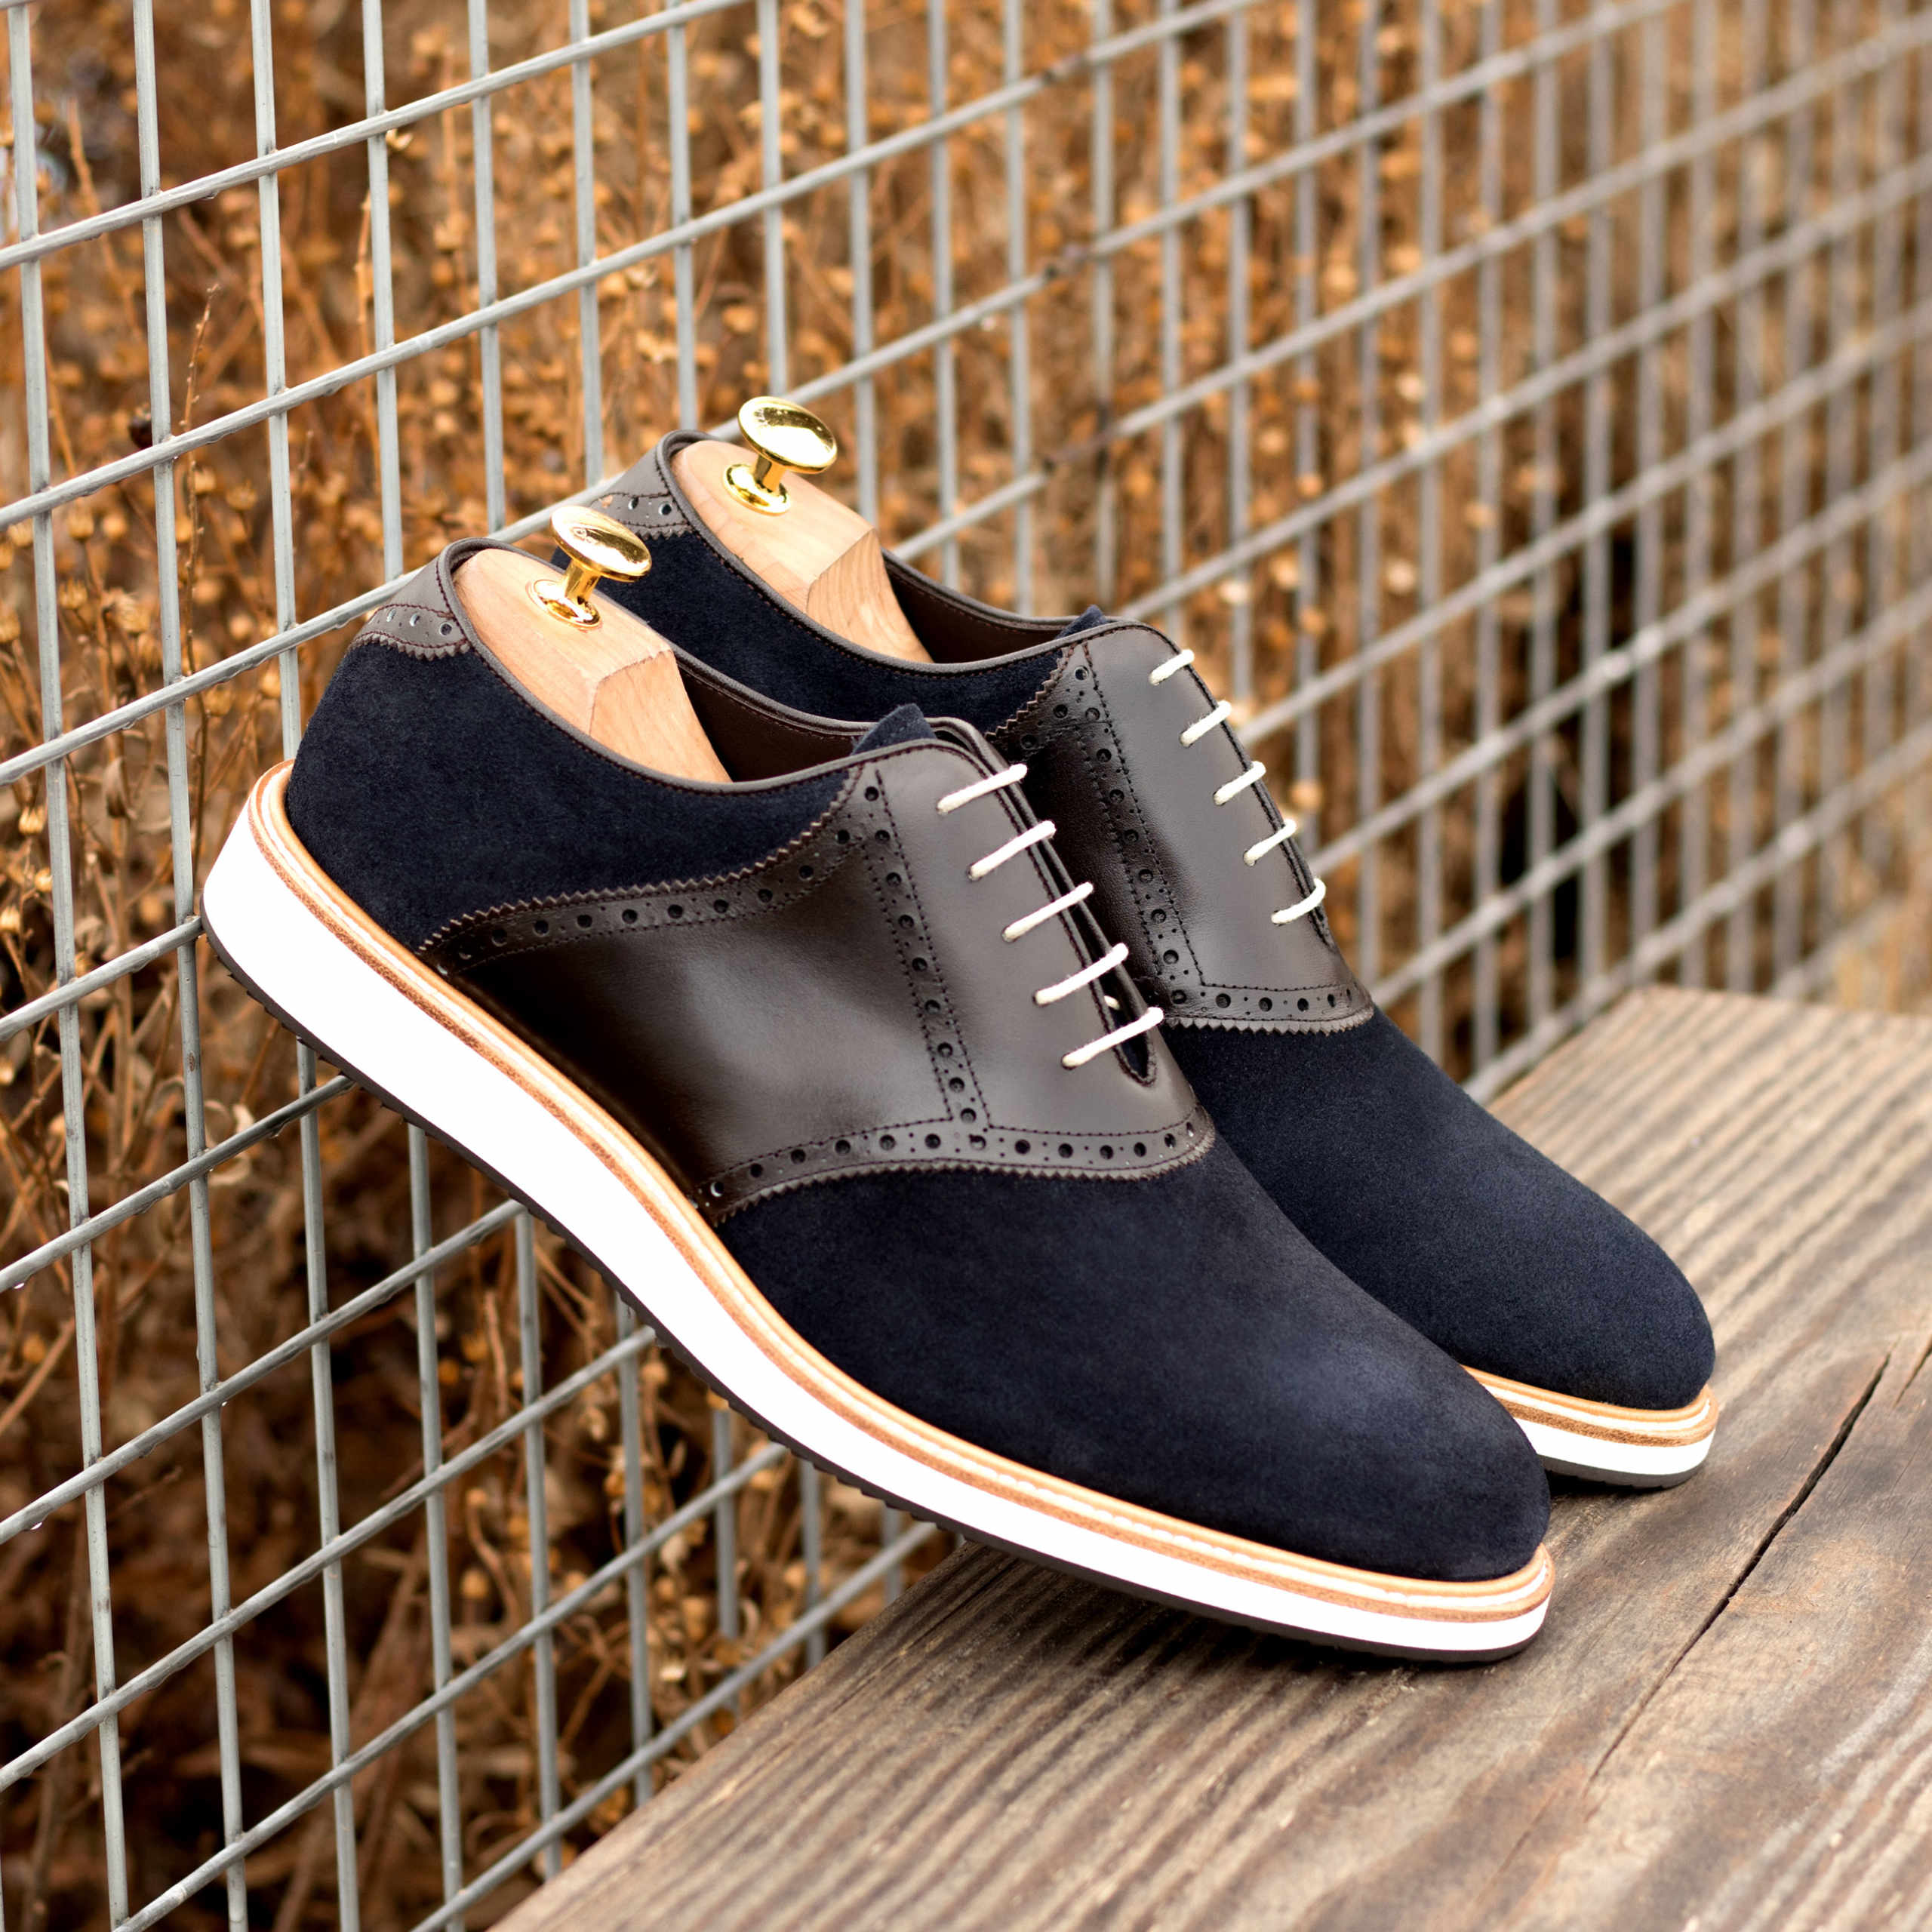 Rooster League: Custom Handmade Shoes at Radical Prices